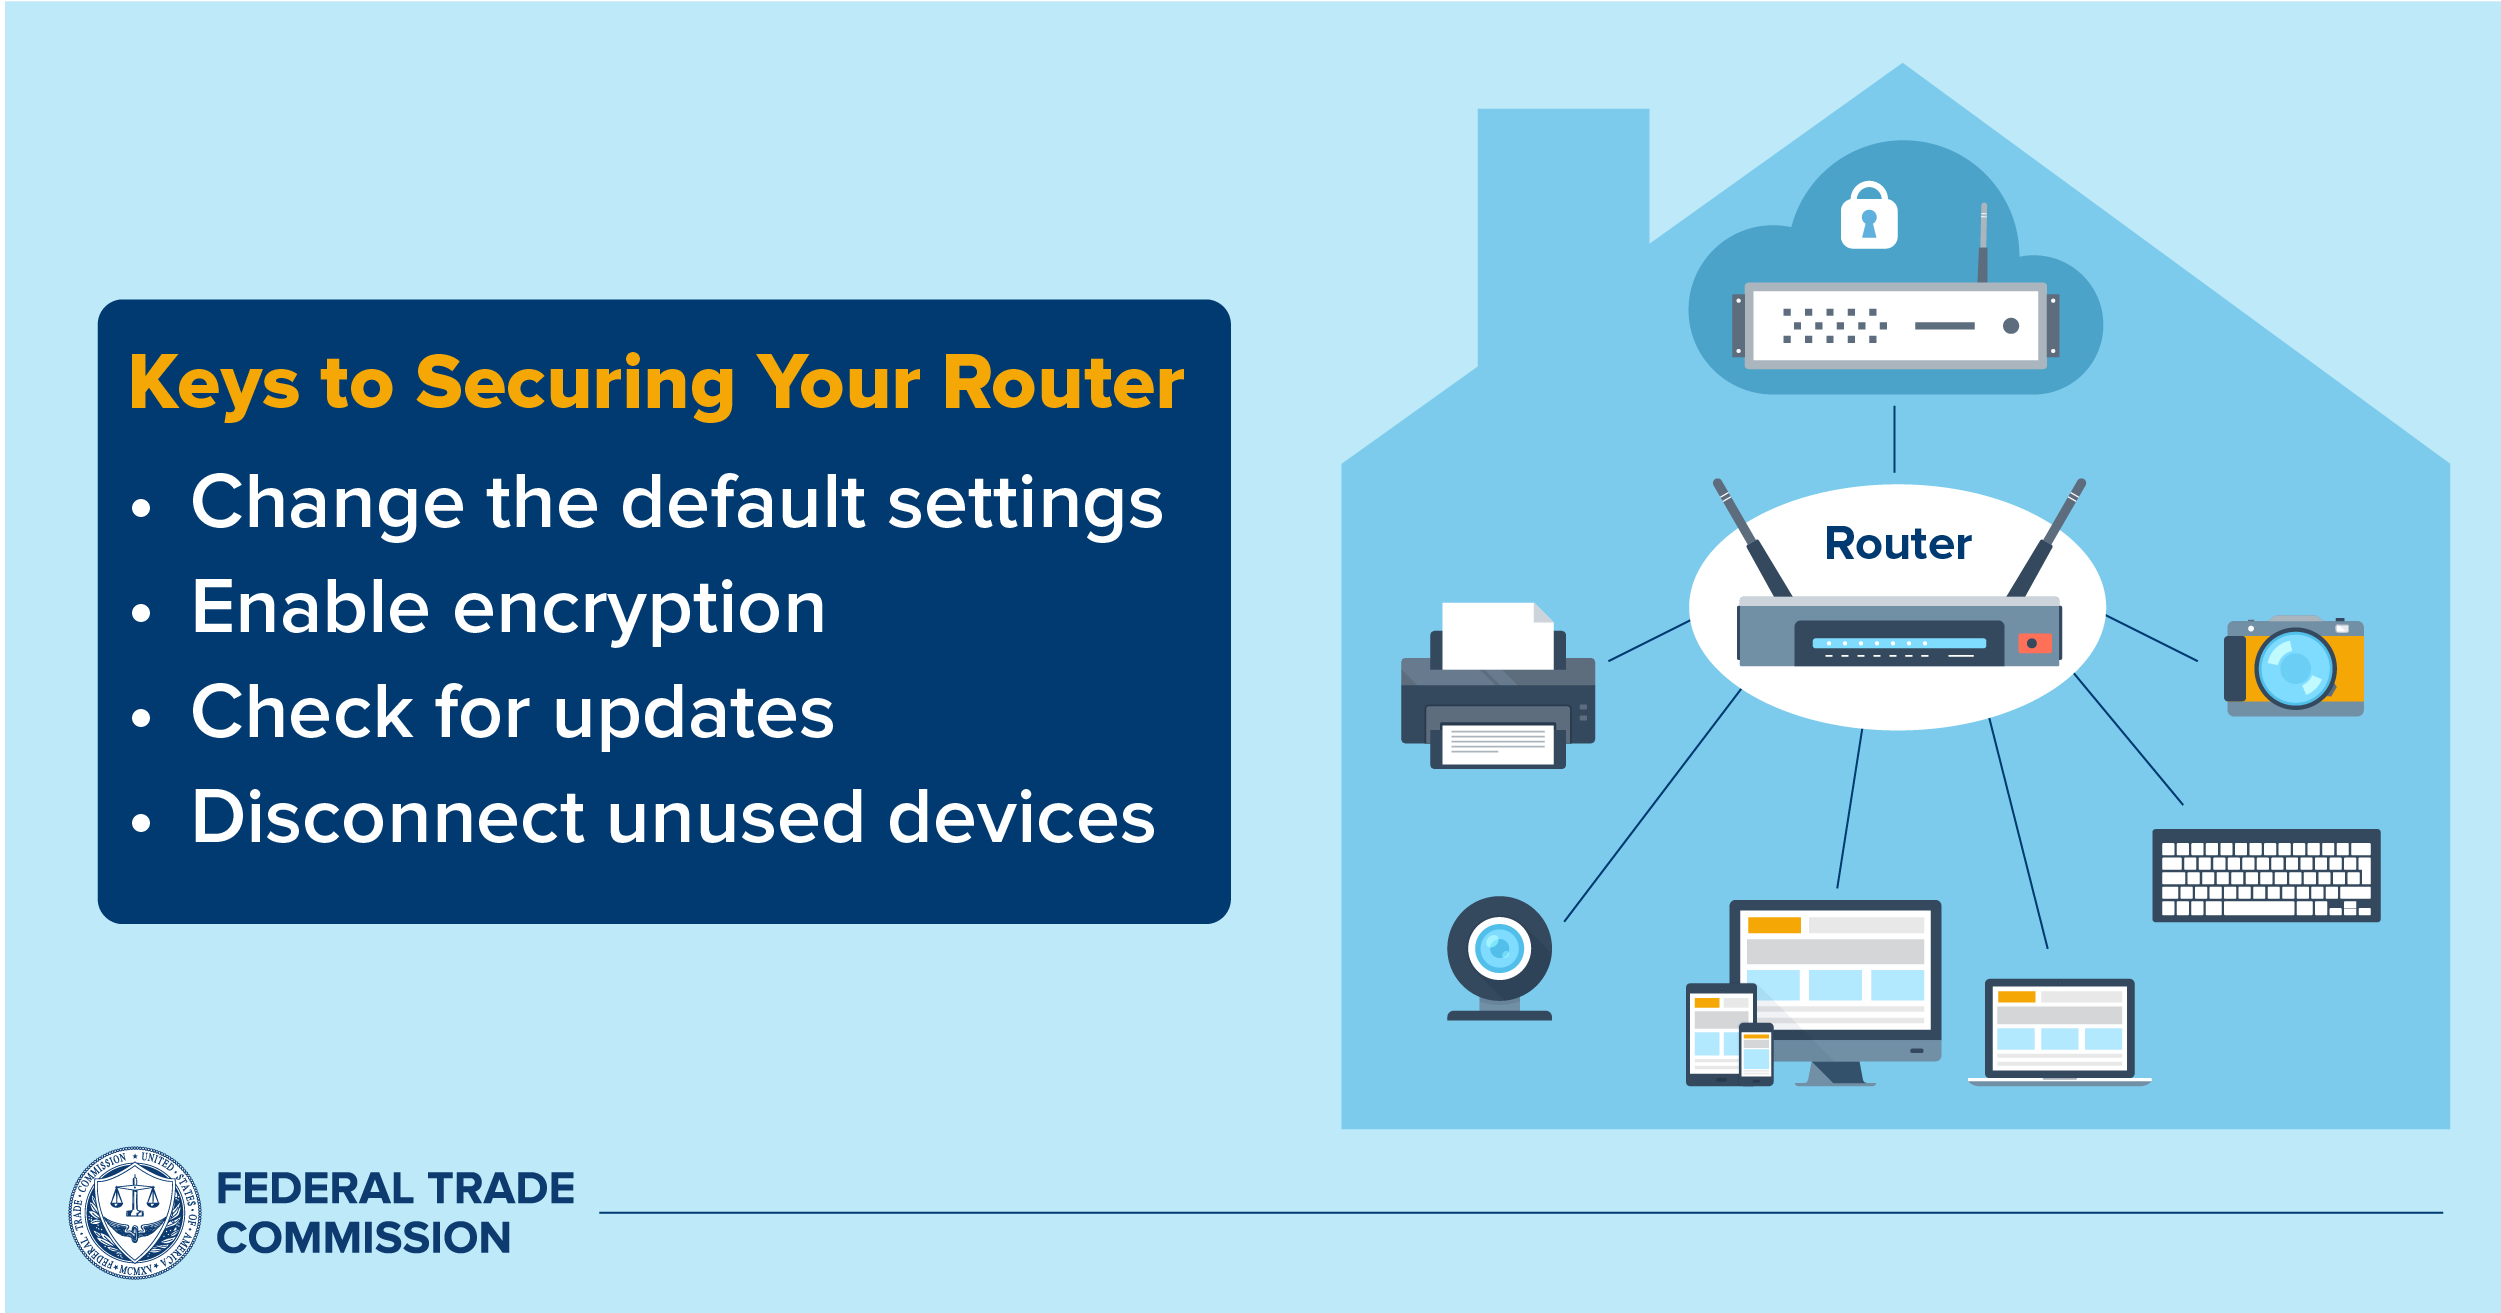 “Cybersecurity for Smart Homes: Protecting Your Connected Devices”